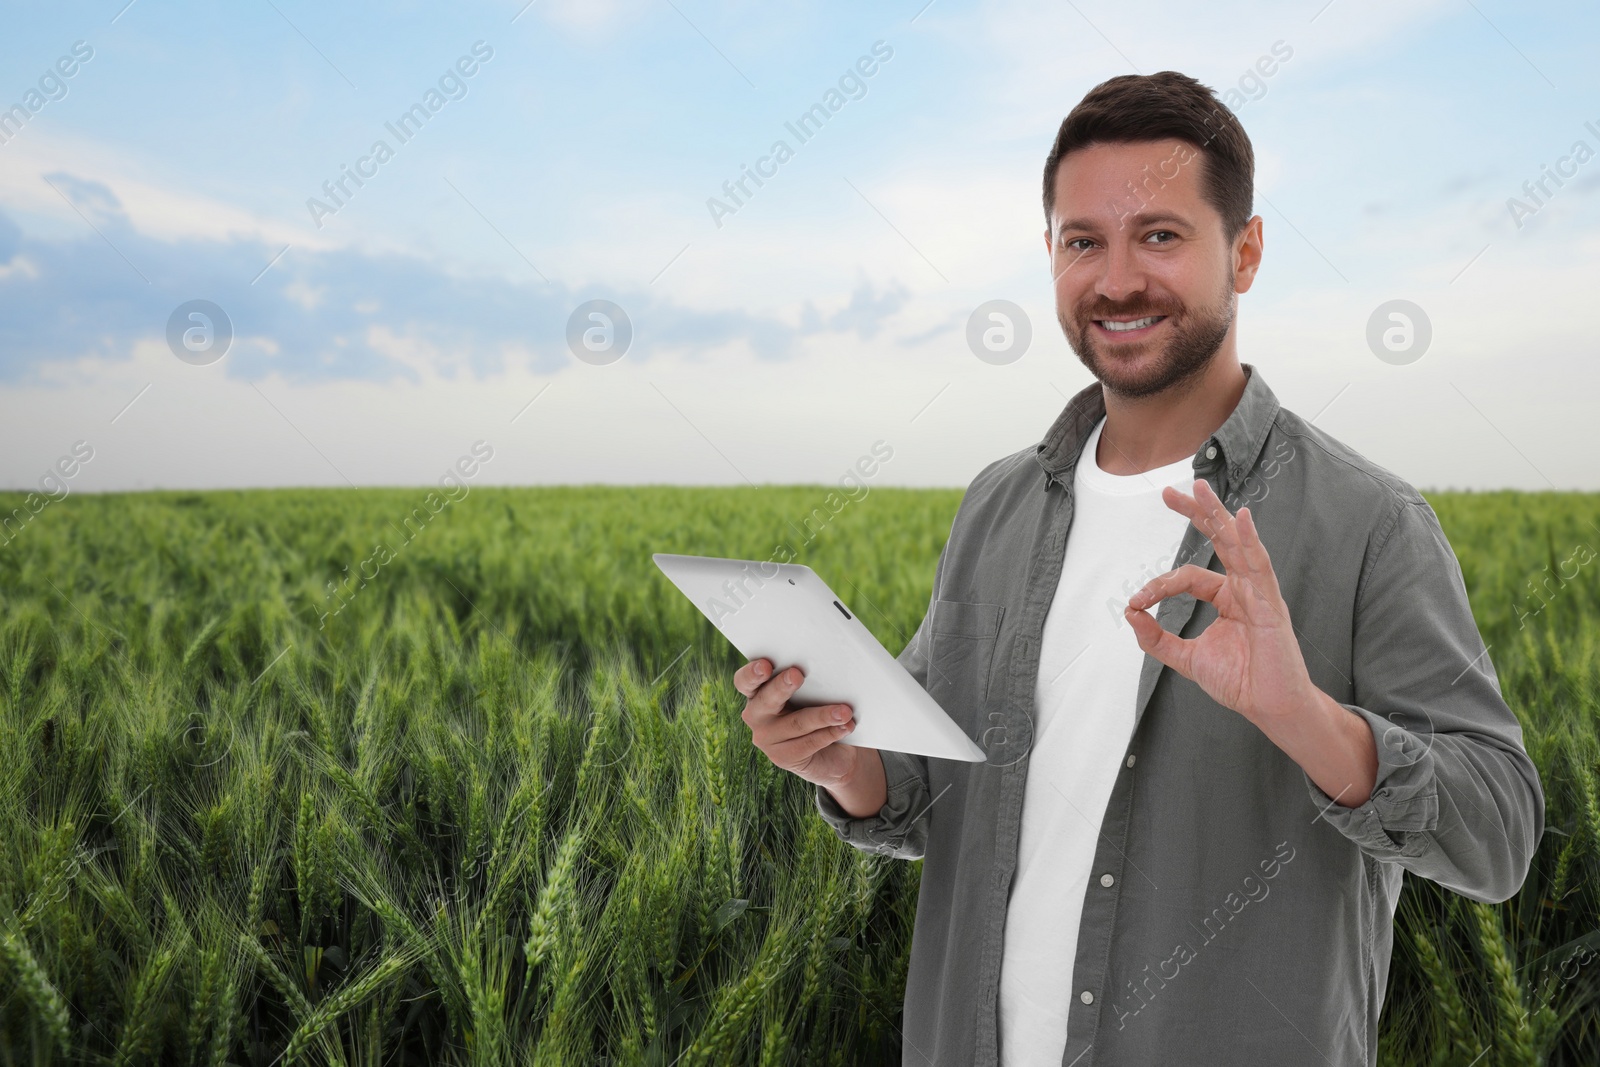 Image of Farmer with tablet computer in field. Harvesting season